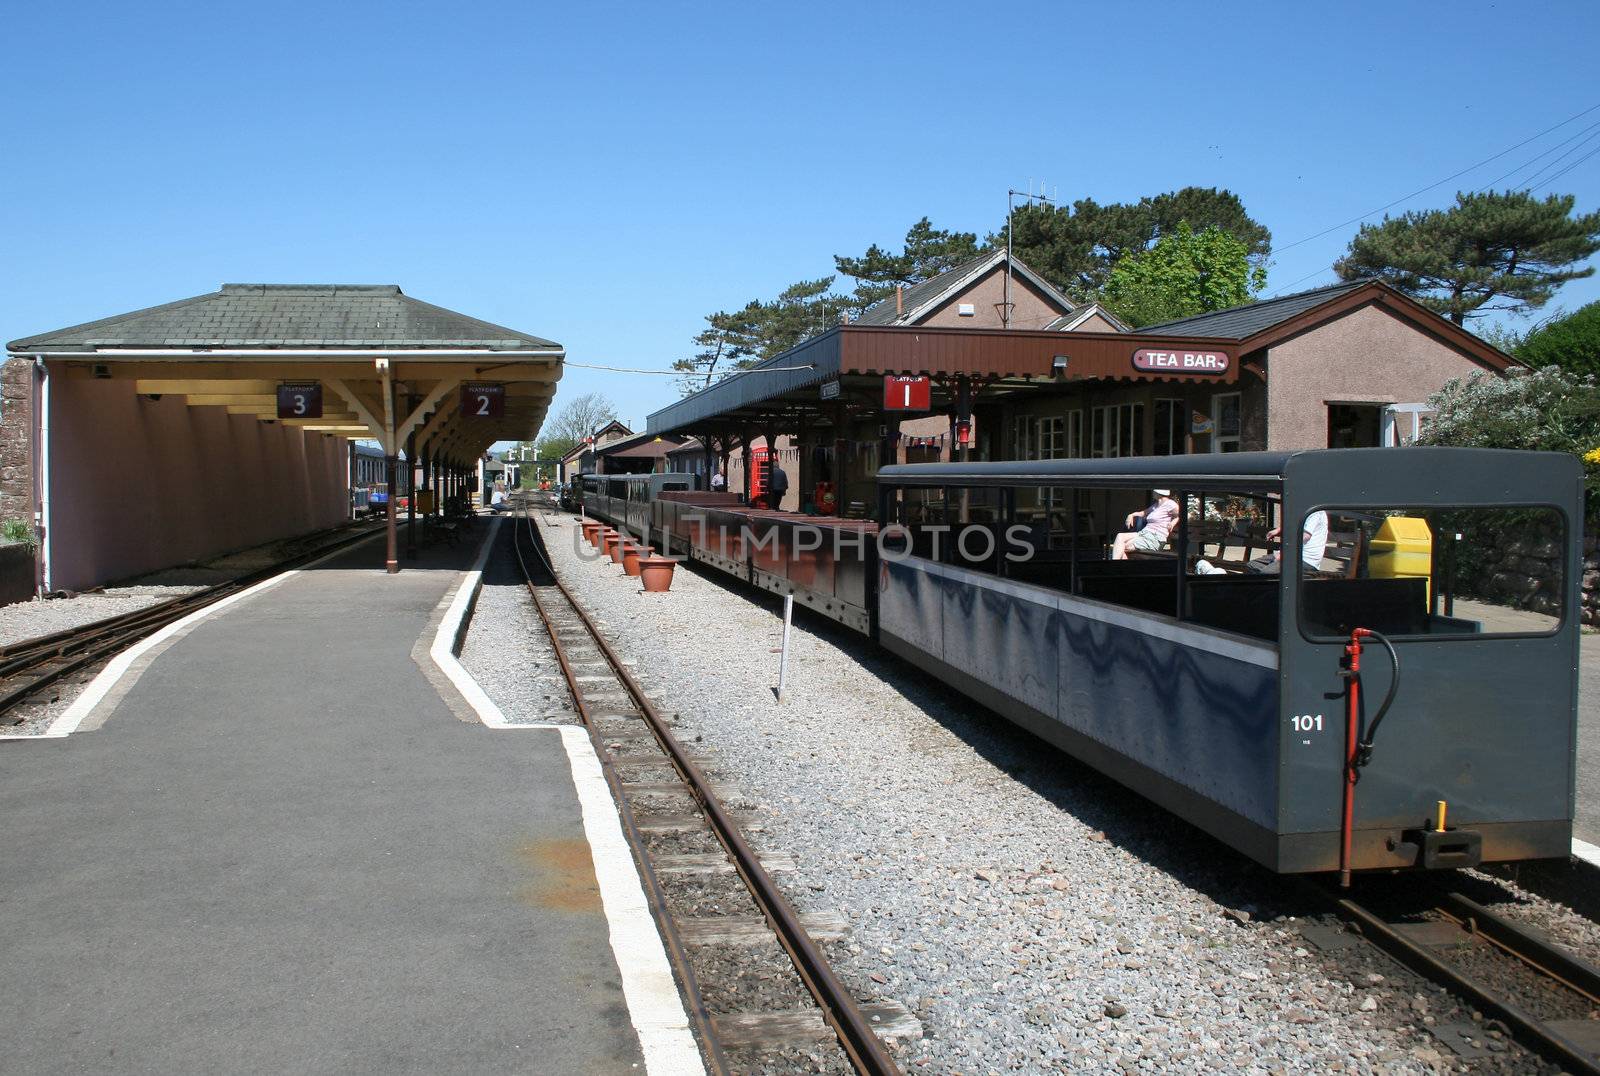 train waiting to leave at a narrow gauge railway station